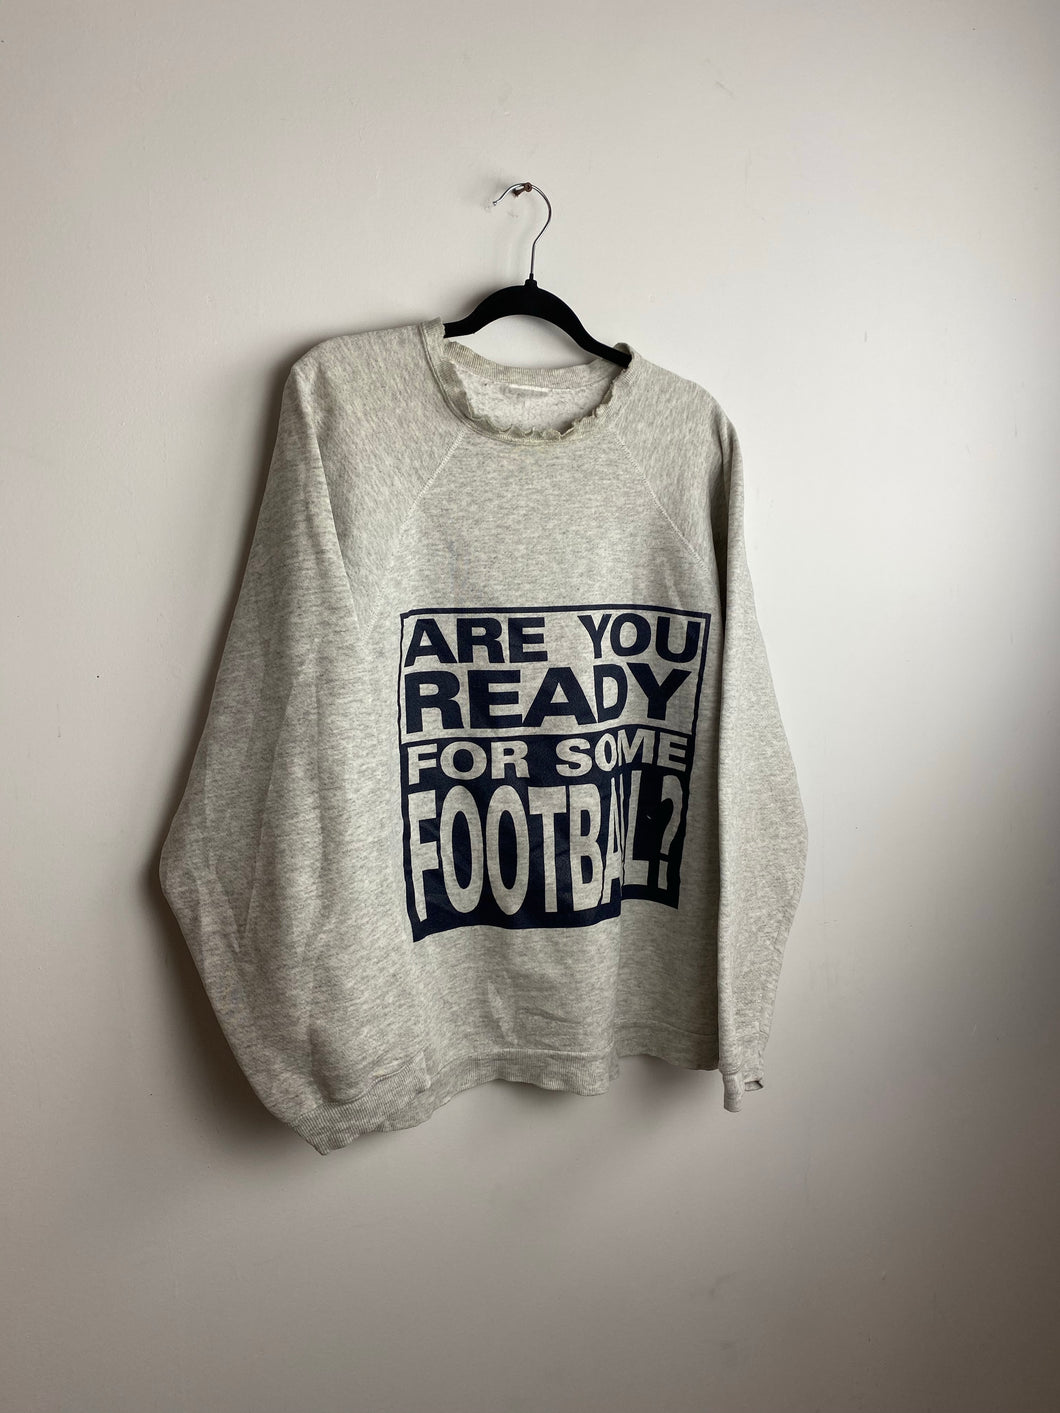 90s front and back football crewneck